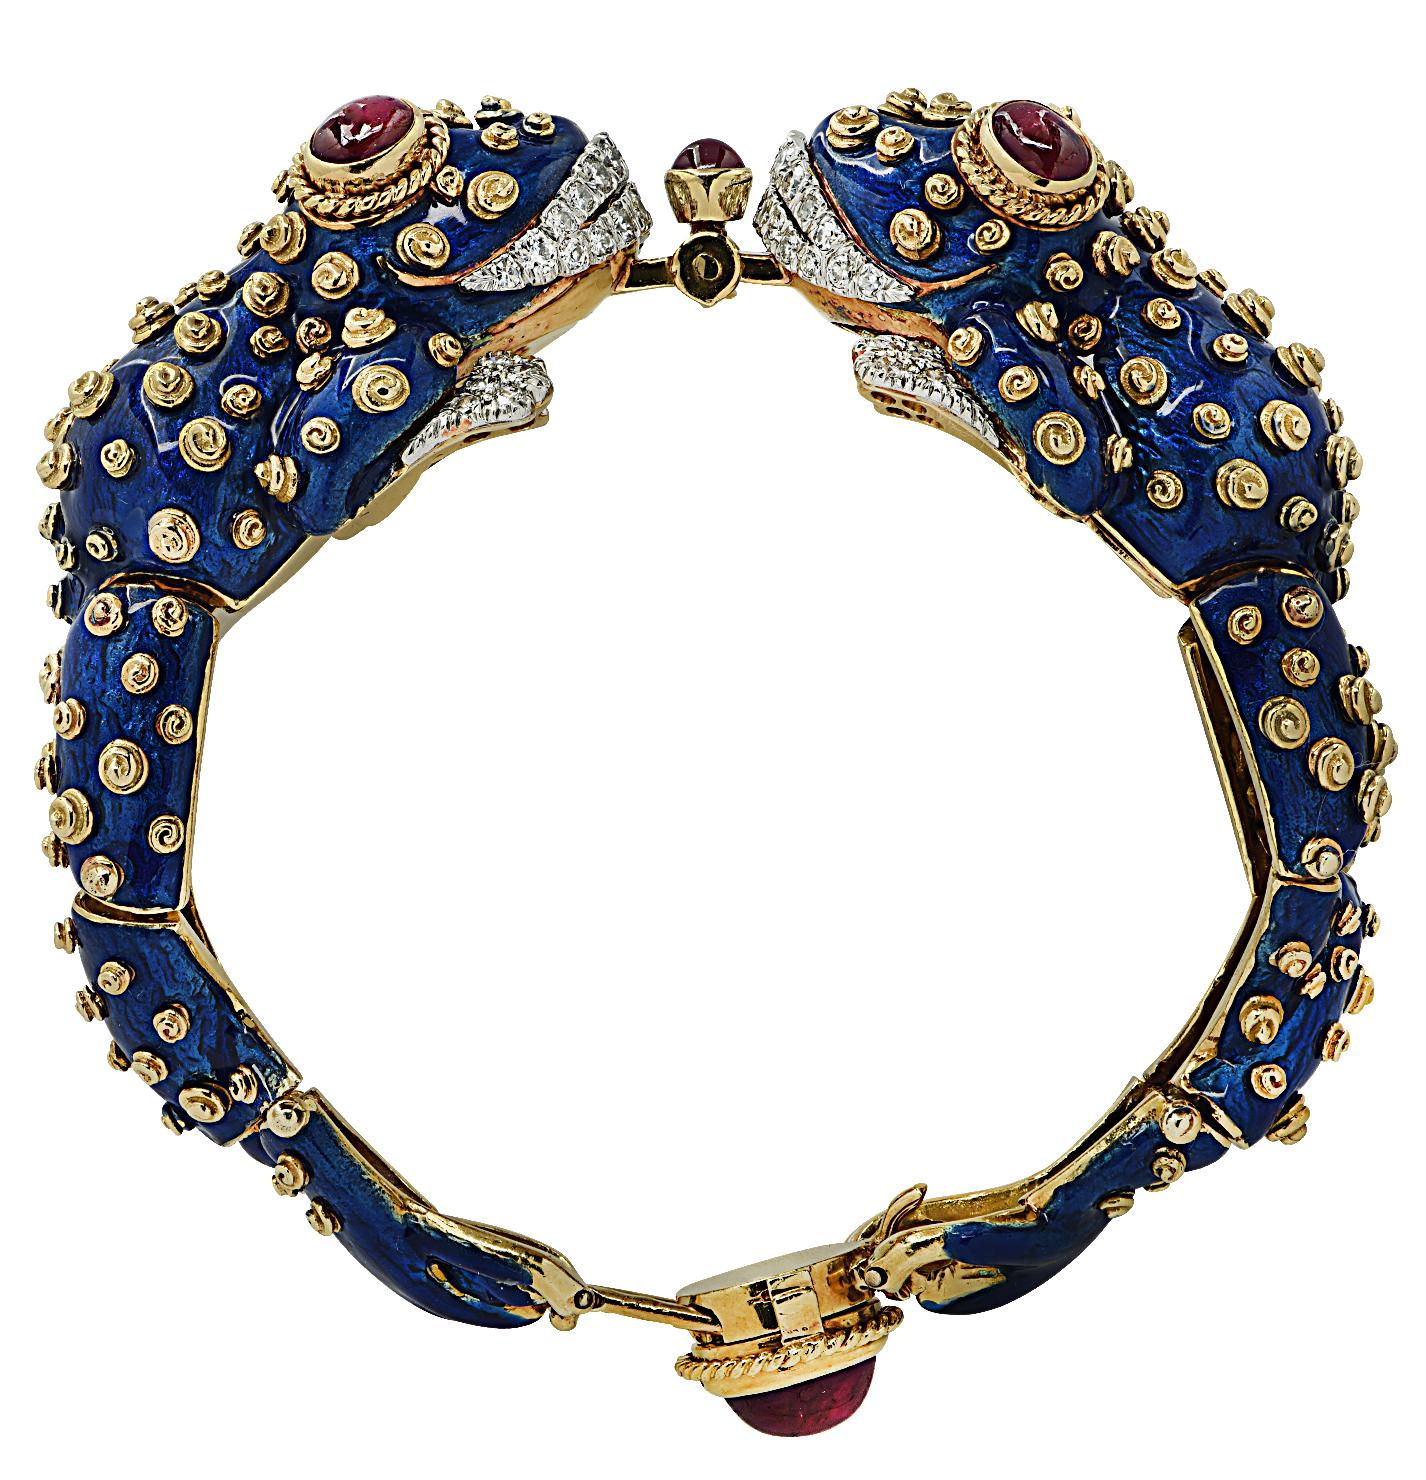 Stunning David Webb diamond, cabochon ruby, and blue enamel bracelet crafted in 18 karat yellow gold and platinum. Featuring 42 round brilliant cut diamonds weighing approximately 0.90 carats total, F color, VS clarity.  Fashioned as an articulated